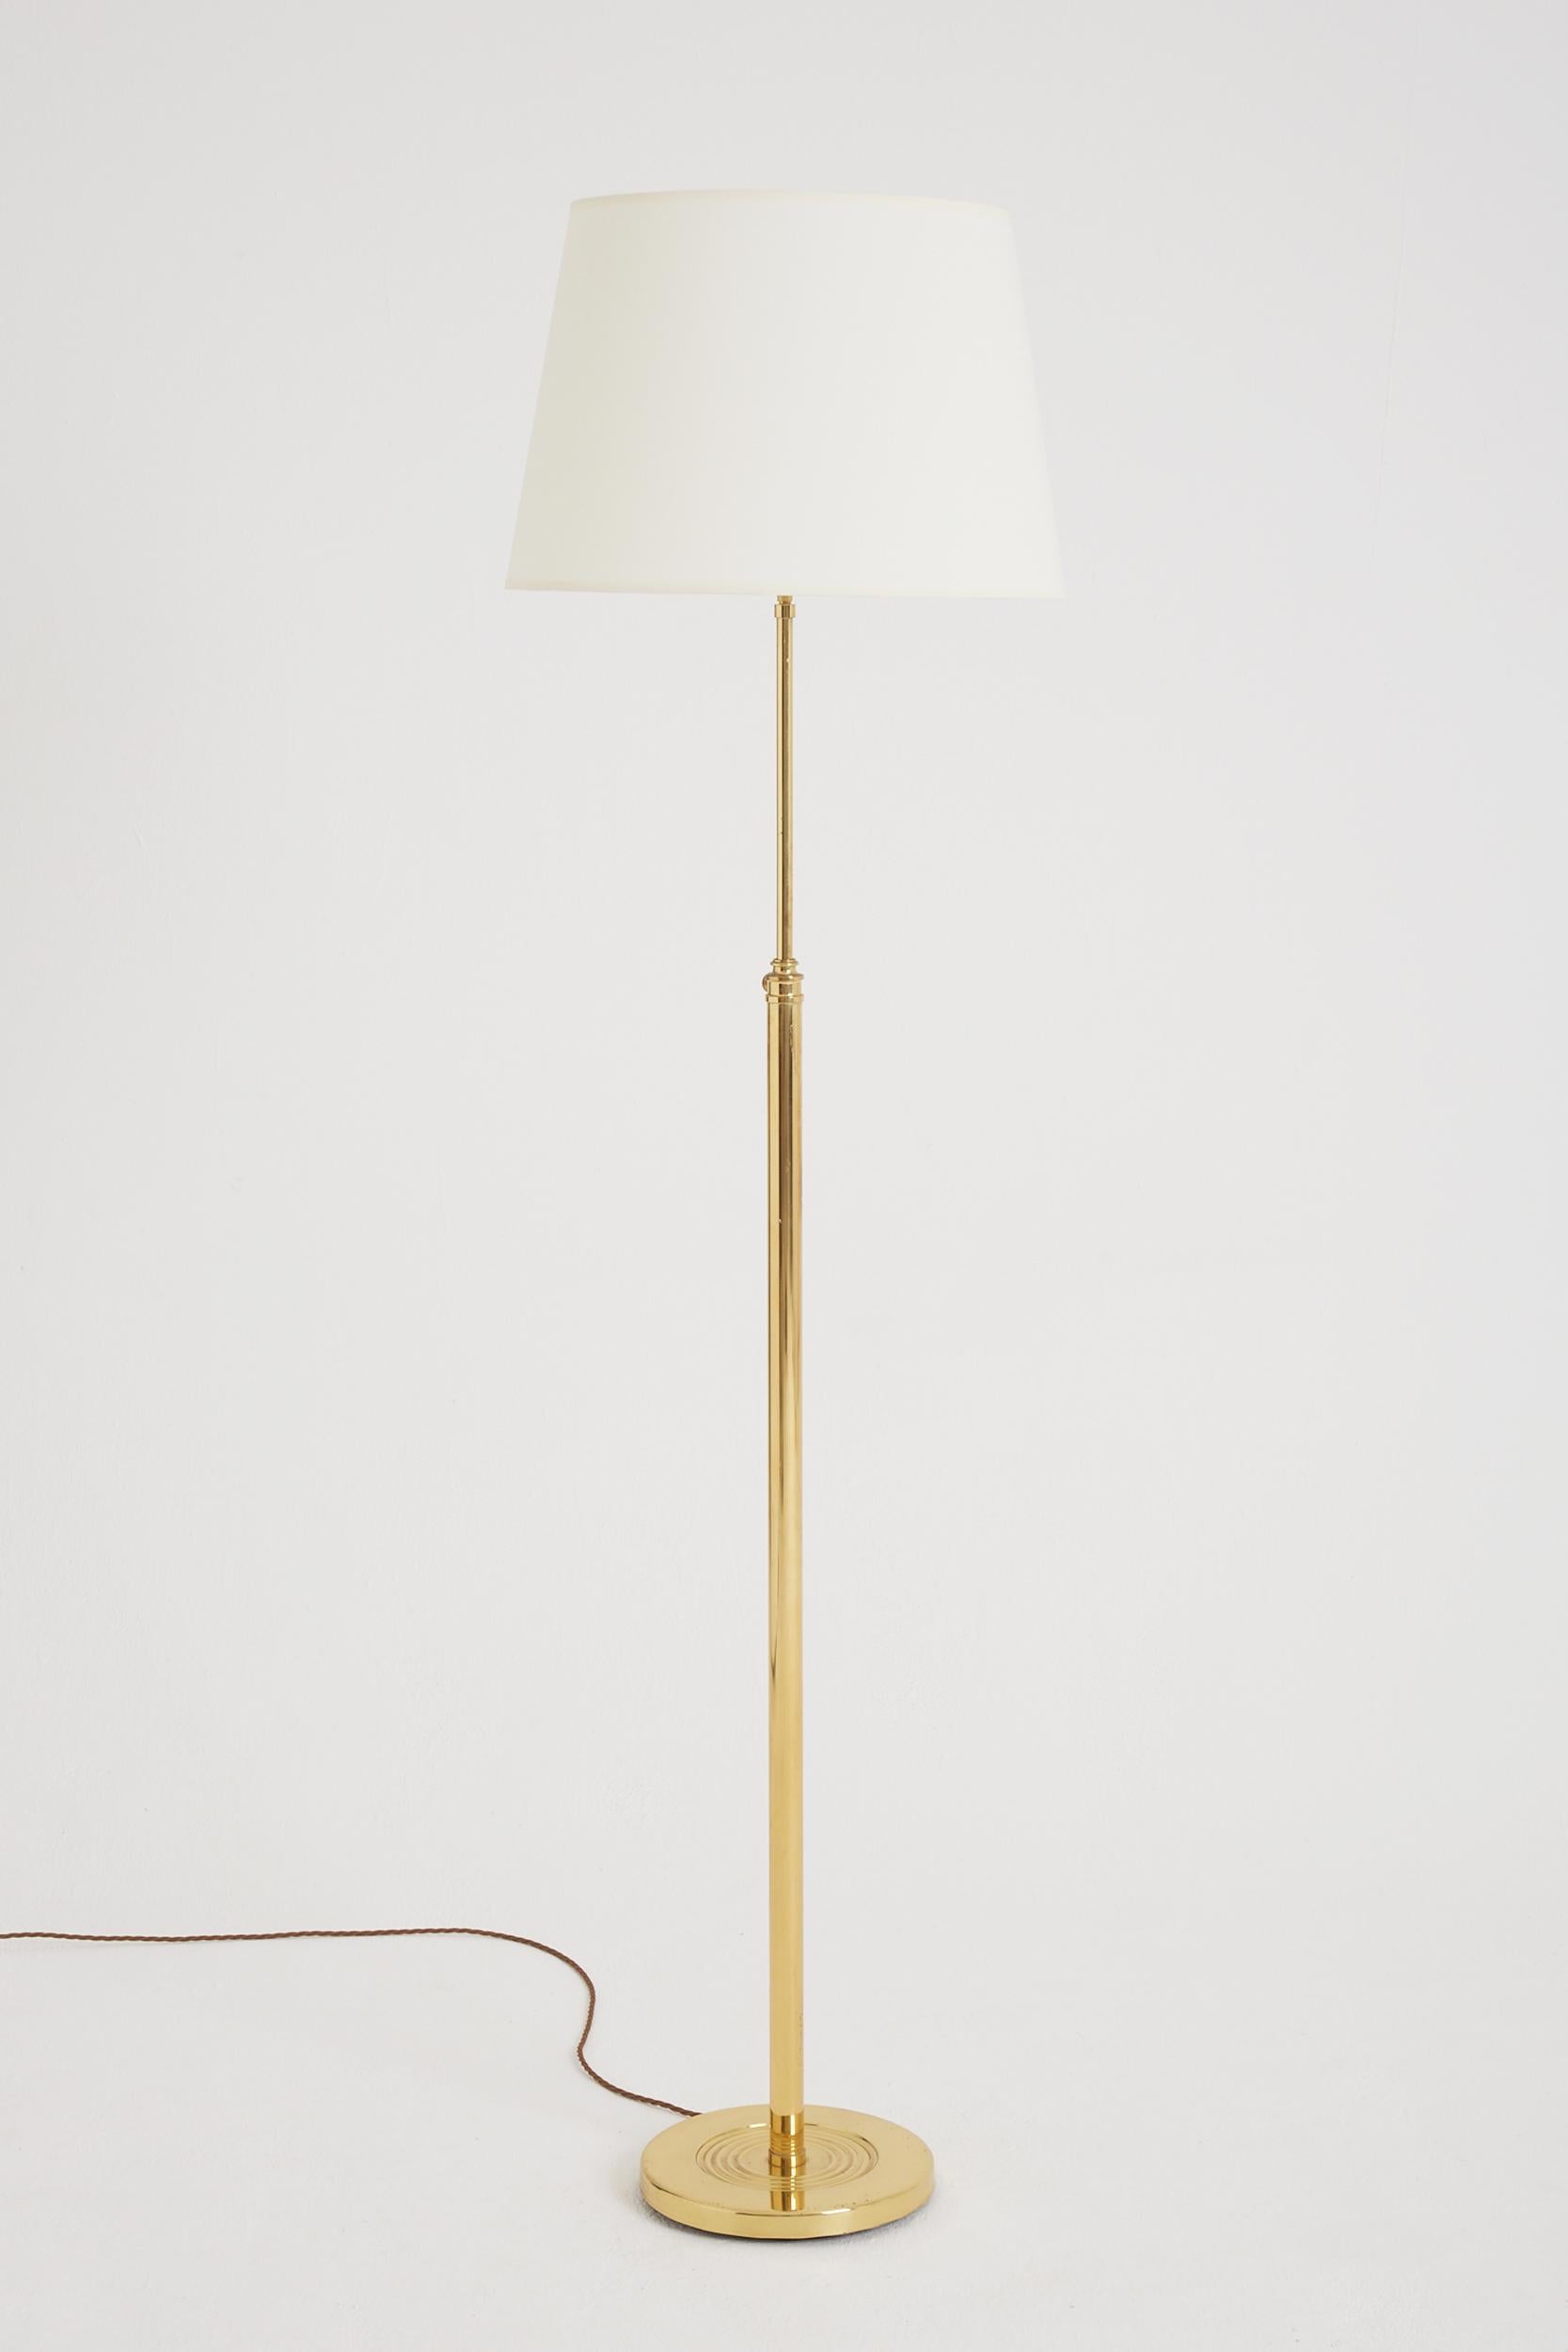 A brass telescopic lacquered brass floor lamp.
France, third quarter of the 20th Century.
With the shade (as pictured): 160 cm high by 45 cm diameter
Lamp base only (as pictured): 135 cm high by 26 cm diameter